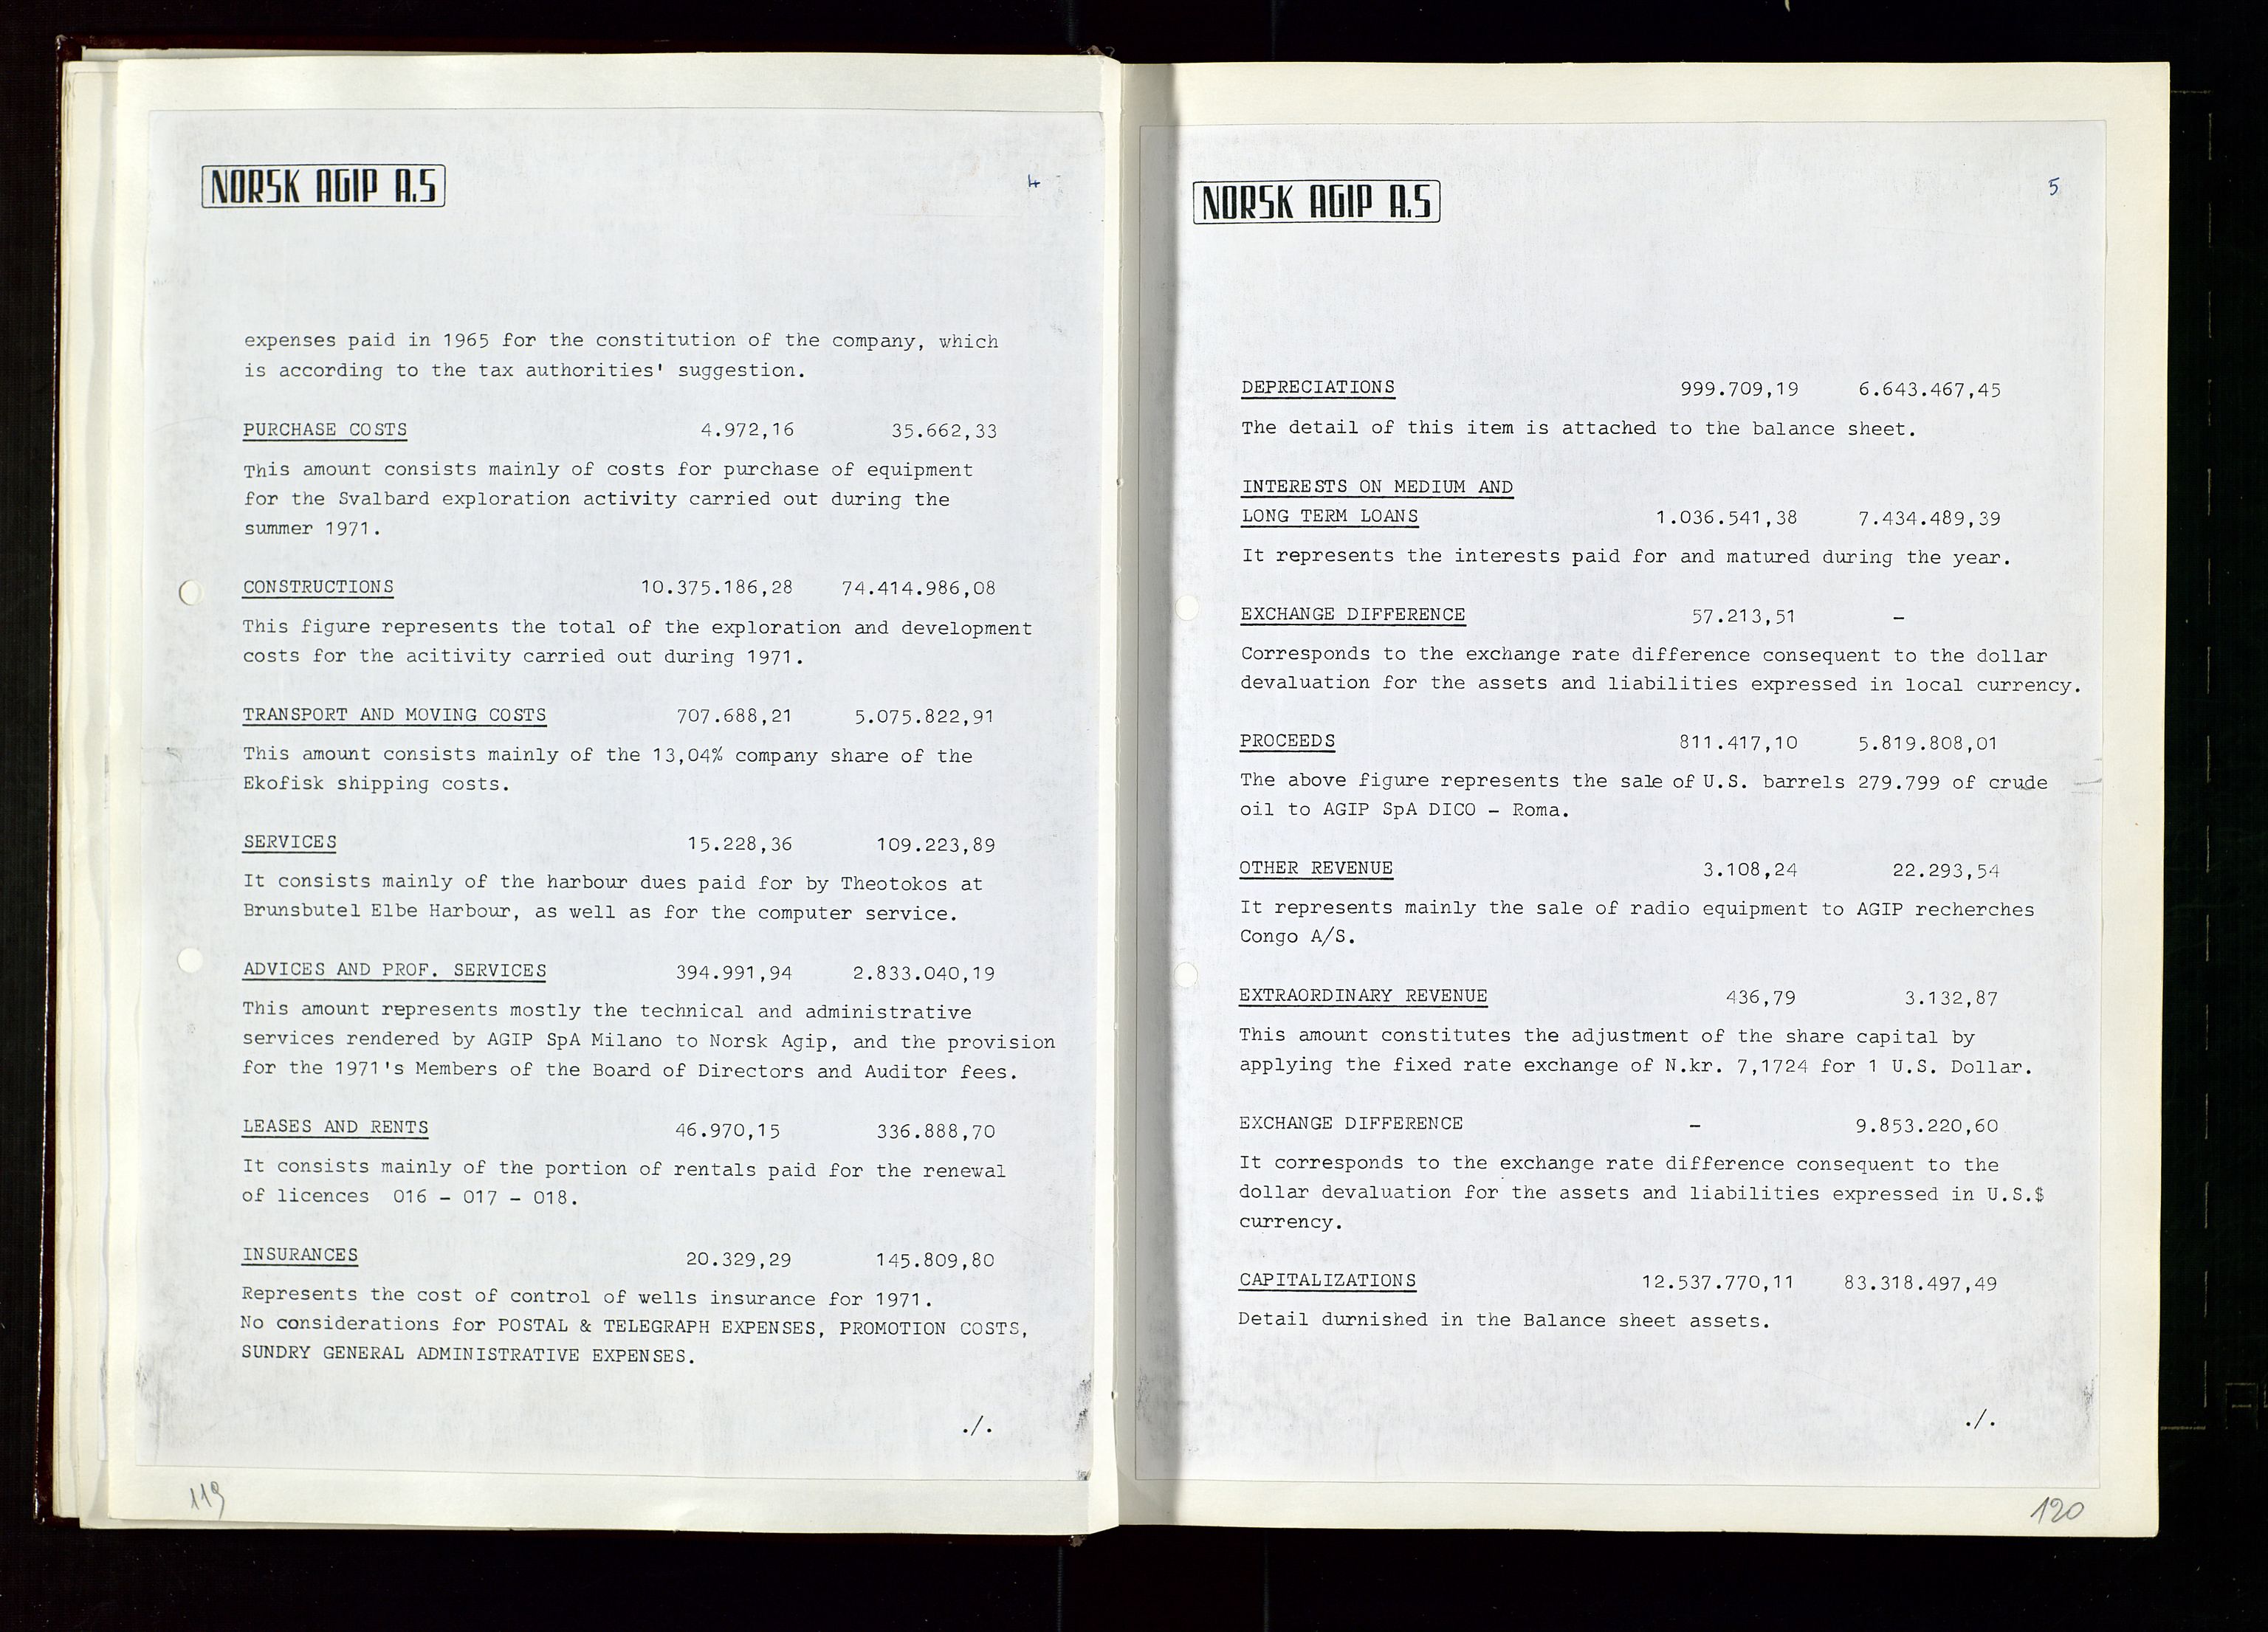 Pa 1583 - Norsk Agip AS, SAST/A-102138/A/Aa/L0002: General assembly and Board of Directors meeting minutes, 1972-1979, p. 119-120